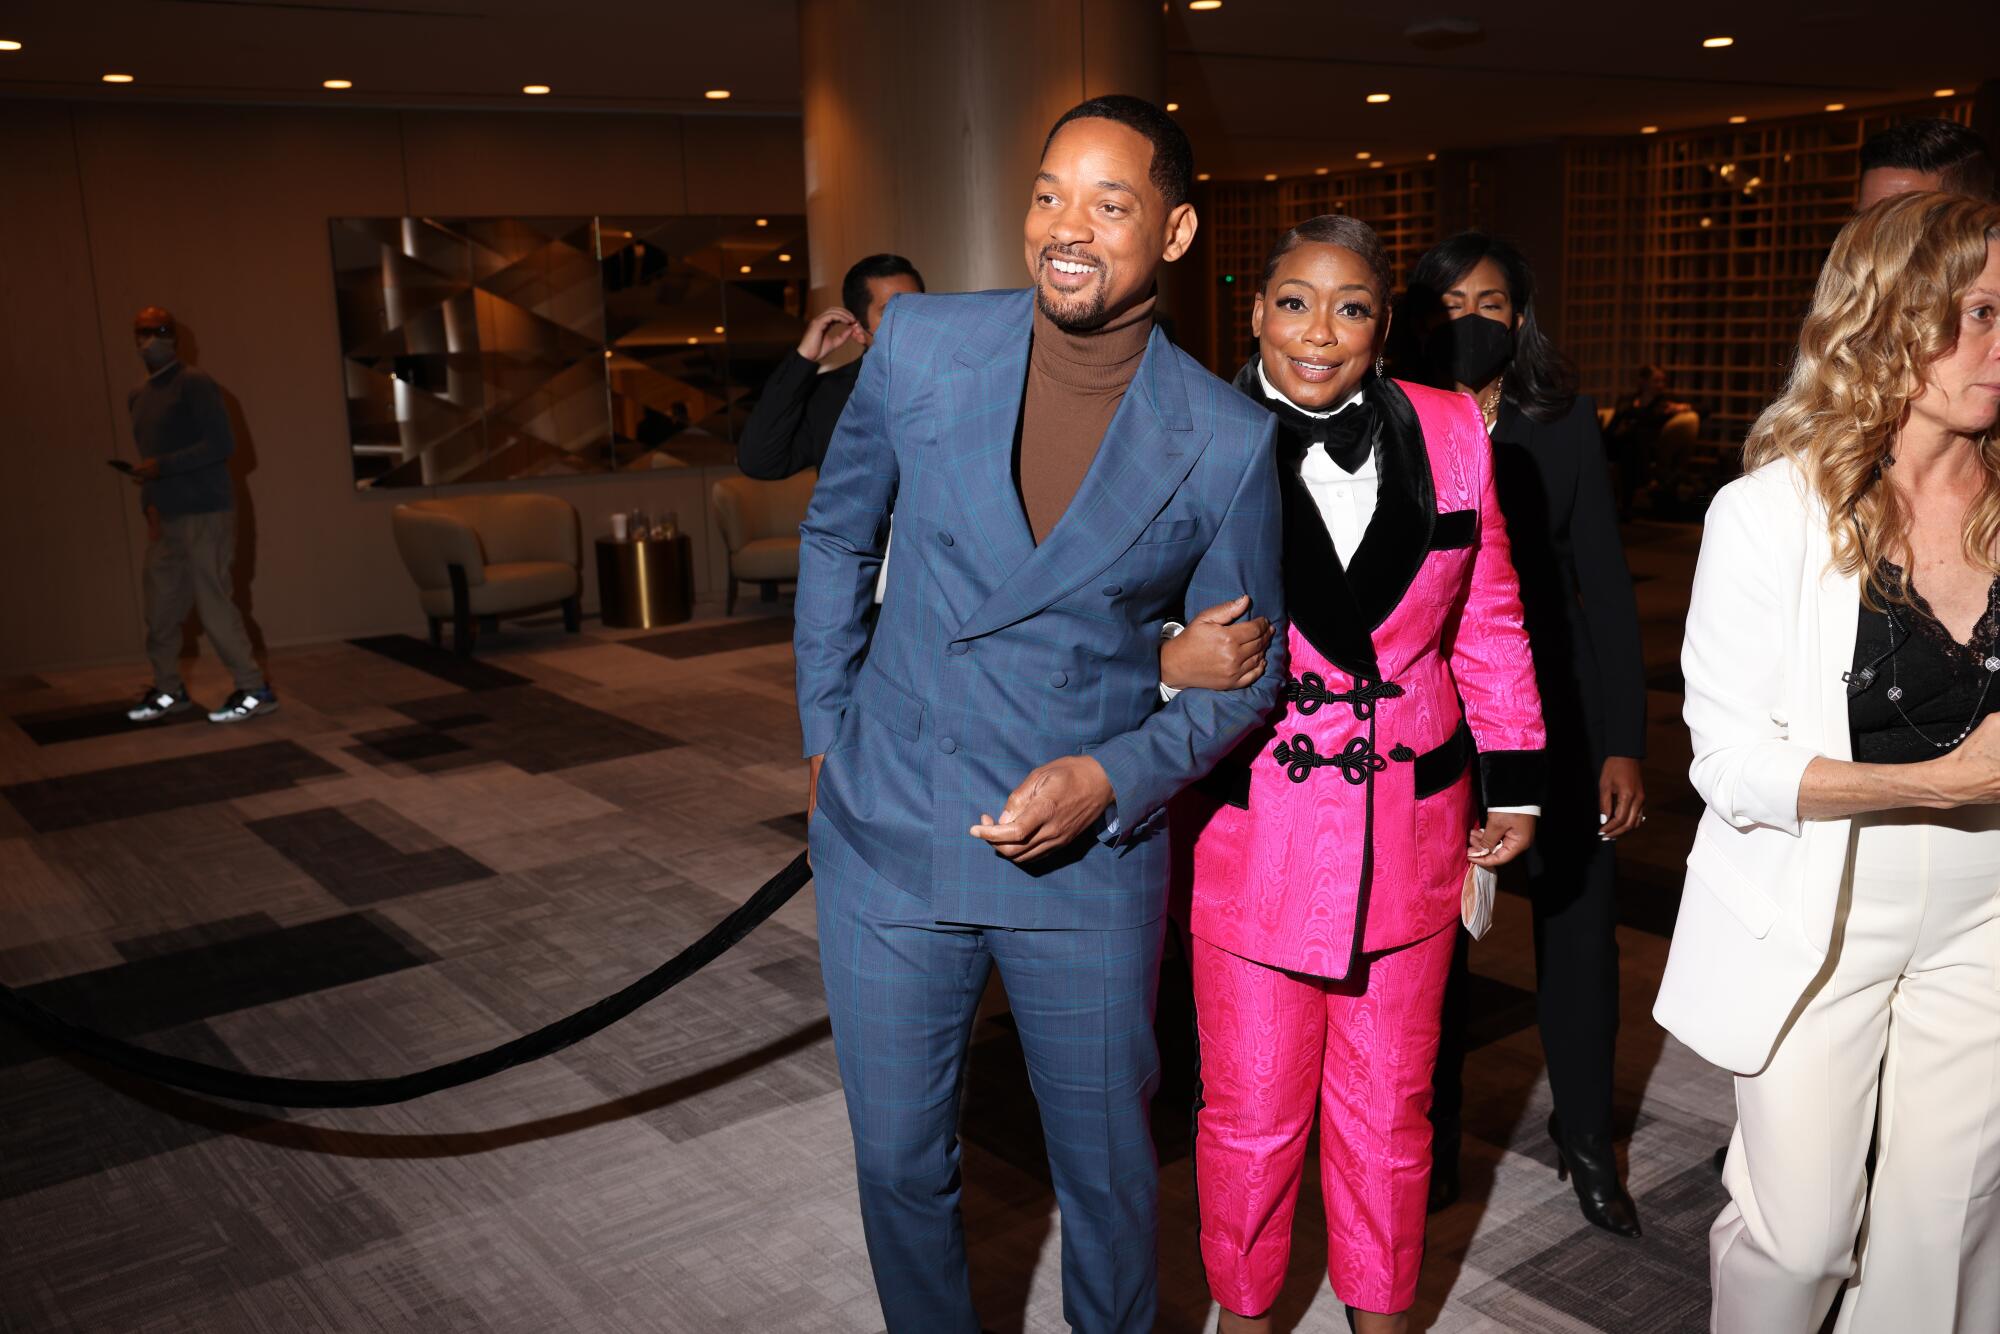 Will Smith, left, joined by Aunjanue Ellis.